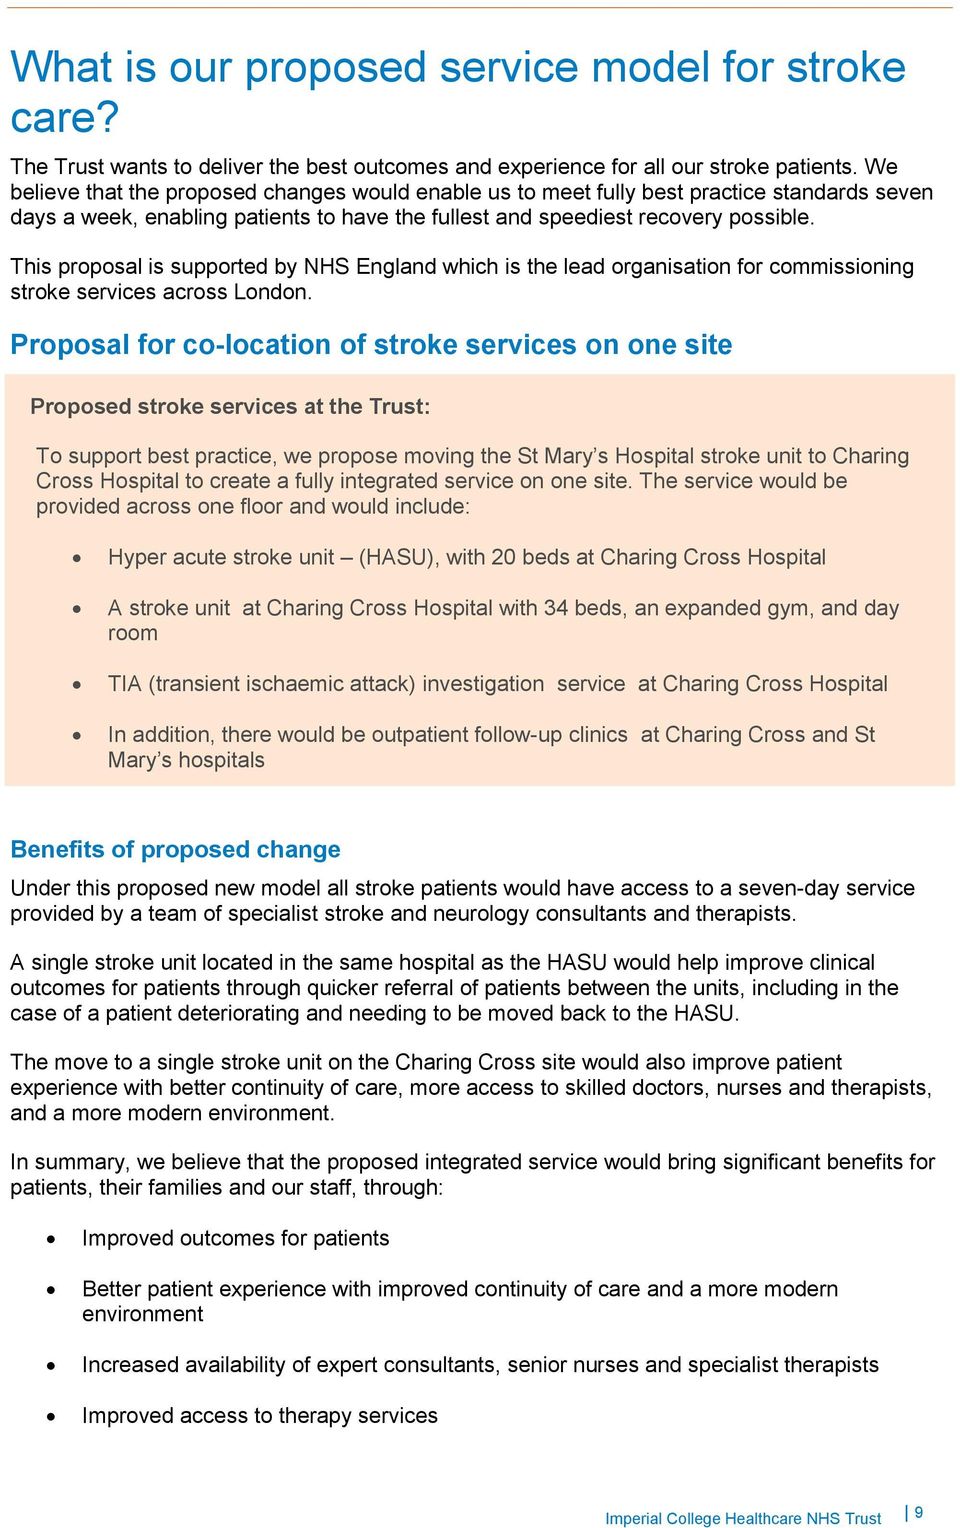 This proposal is supported by NHS England which is the lead organisation for commissioning stroke services across London.